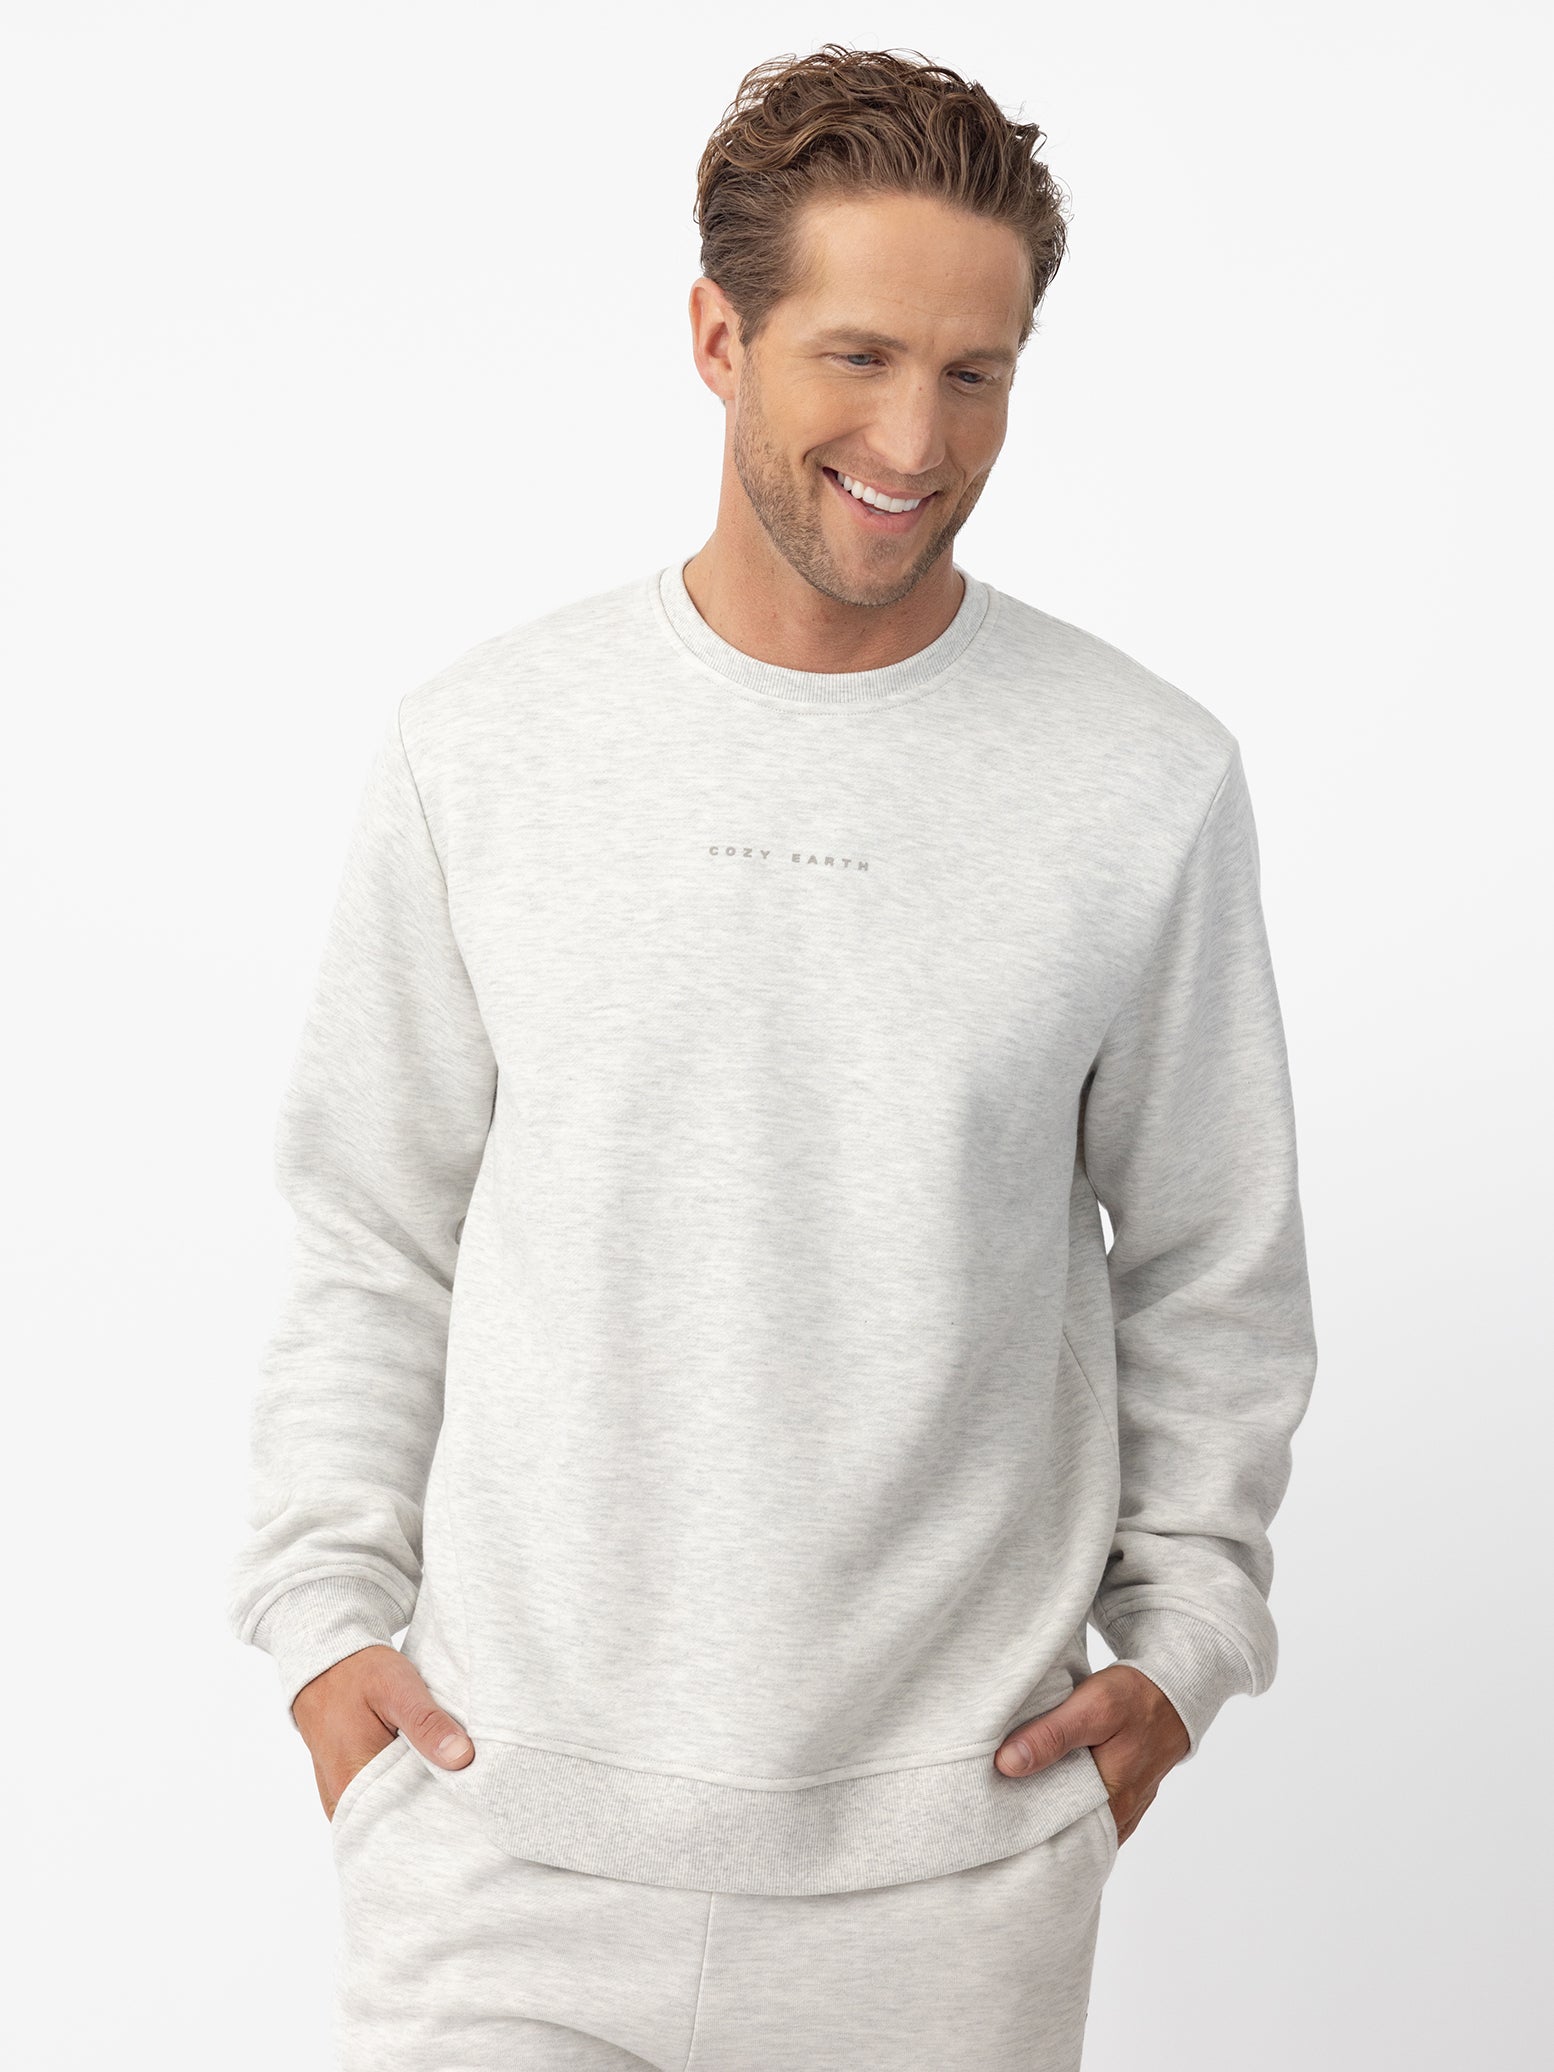 Man wearing heather grey crewneck with white background |Color:Heather Grey